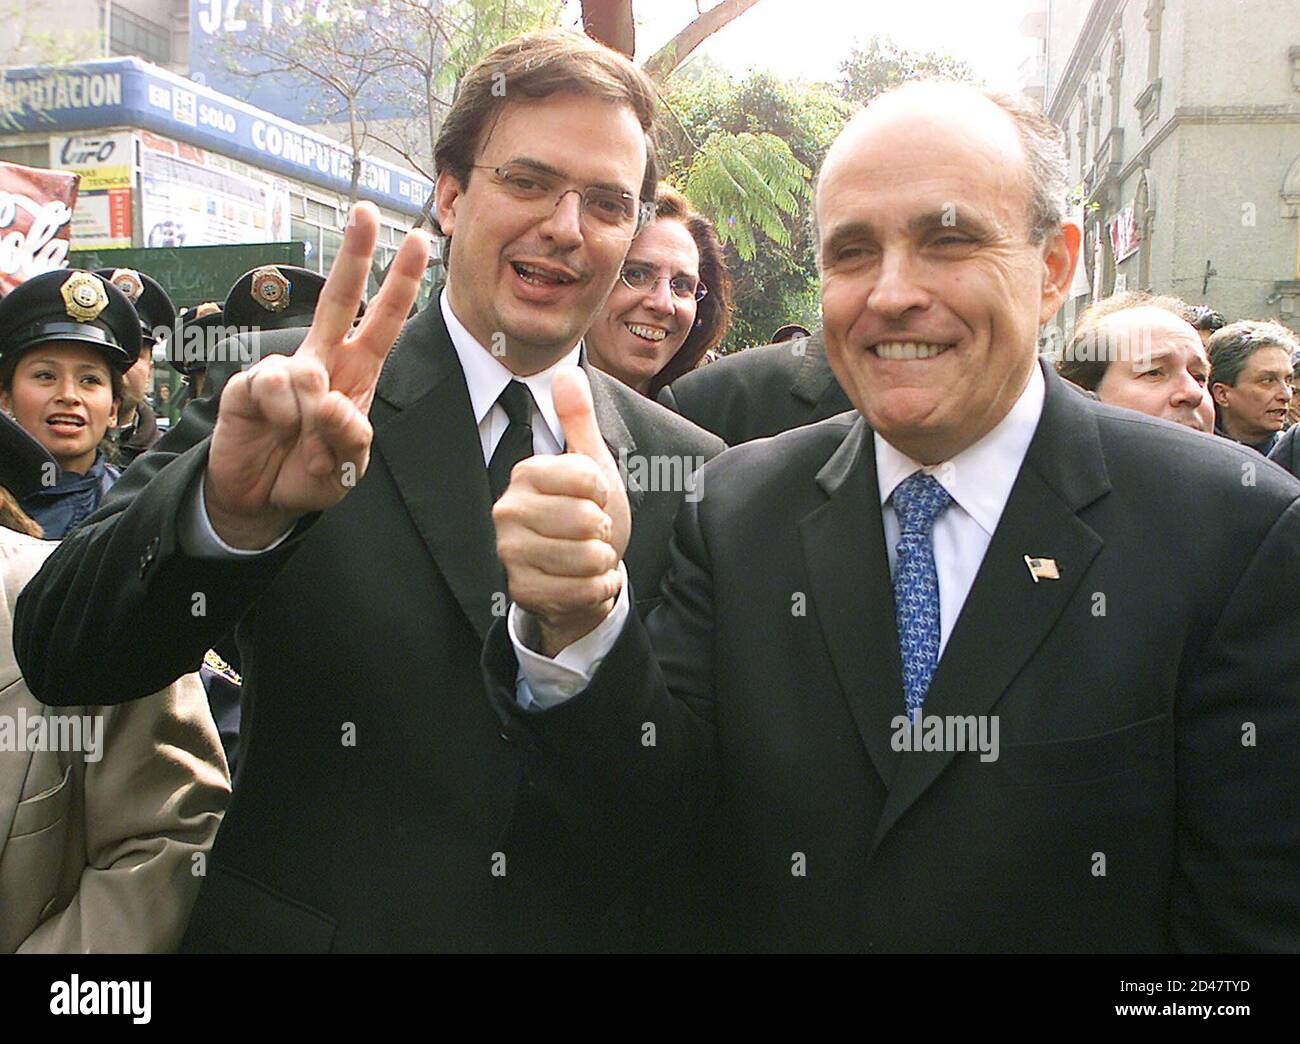 Former New York Mayor Rudy Giuliani (R) and Mexico City's police chief Marcelo Ebrad tour along a street in a popular Mexico City district on January 14, 2002. Famed for taming the wild streets of New York in the 1990s with his 'zero tolerance' crime policy, Giuliani has been hired for $4.3 million by a group of prominent Mexican businessmen to reduce Mexico City's dizzying crime rate. REUTERS/Daniel Aguilar  DA Stock Photo